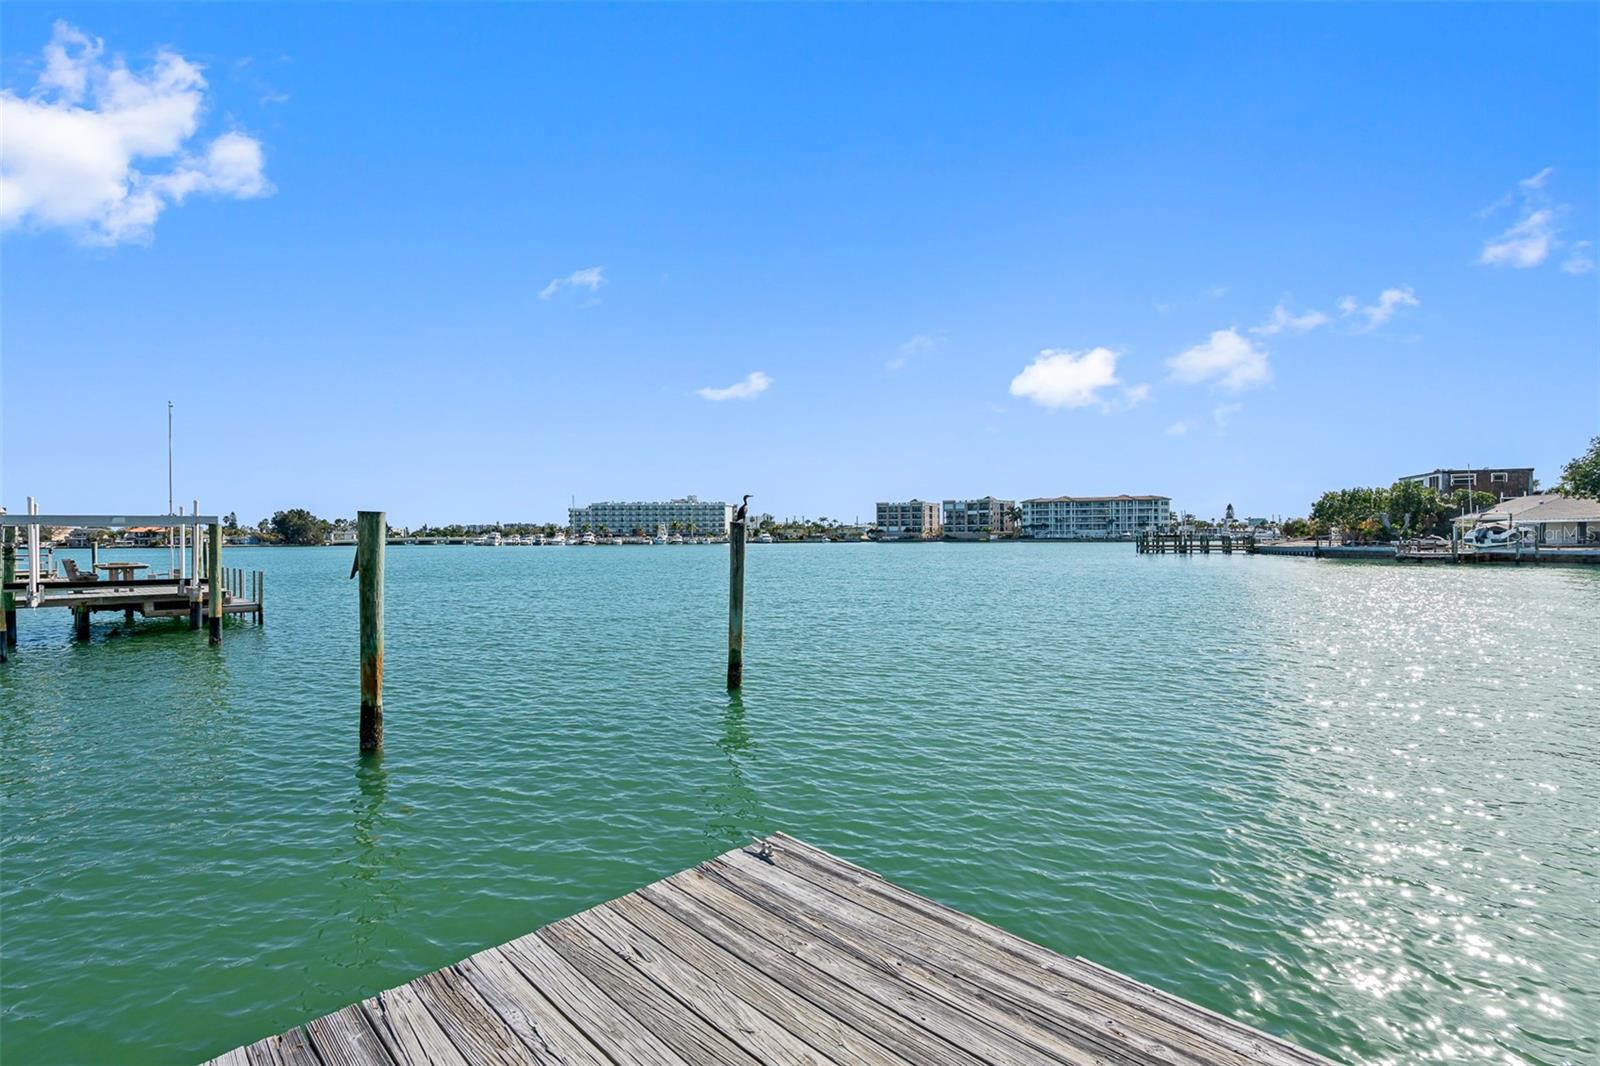 Easy access to the Intracoastal Waterway.